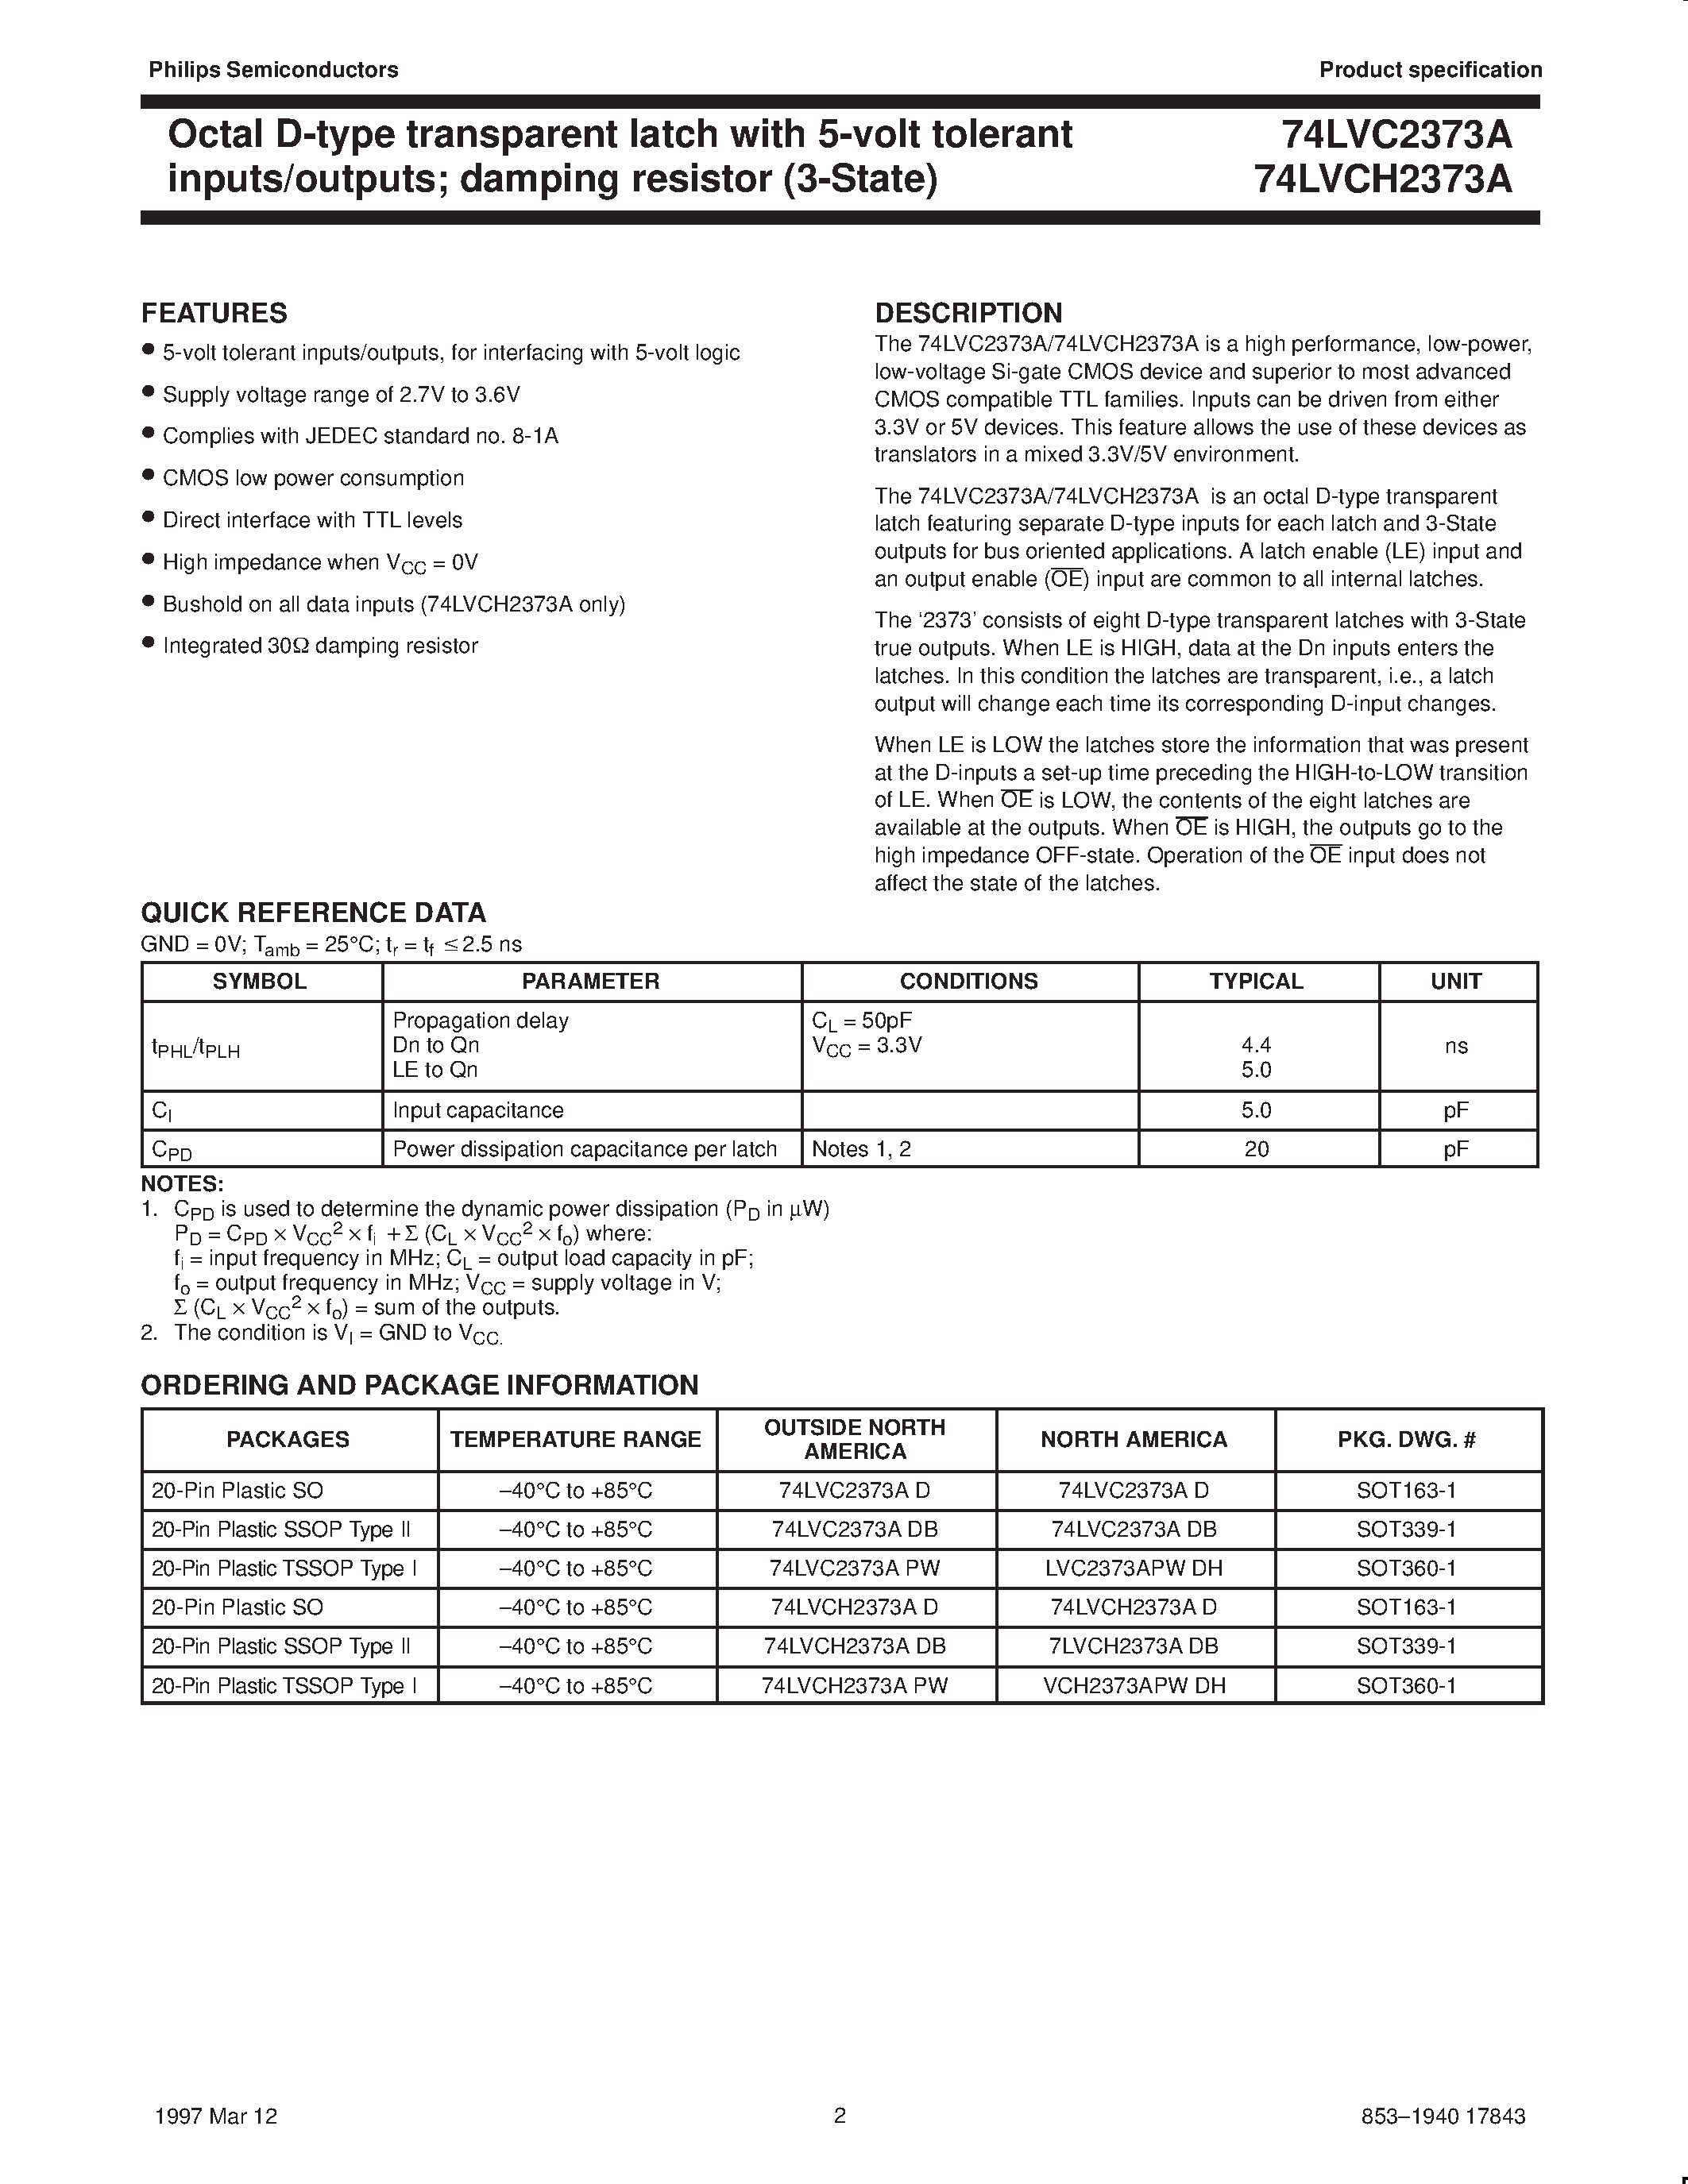 Datasheet VCH2373APWDH - Octal D-type transparent latch with 5-volt tolerant inputs/outputs; damping resistor 3-State page 2